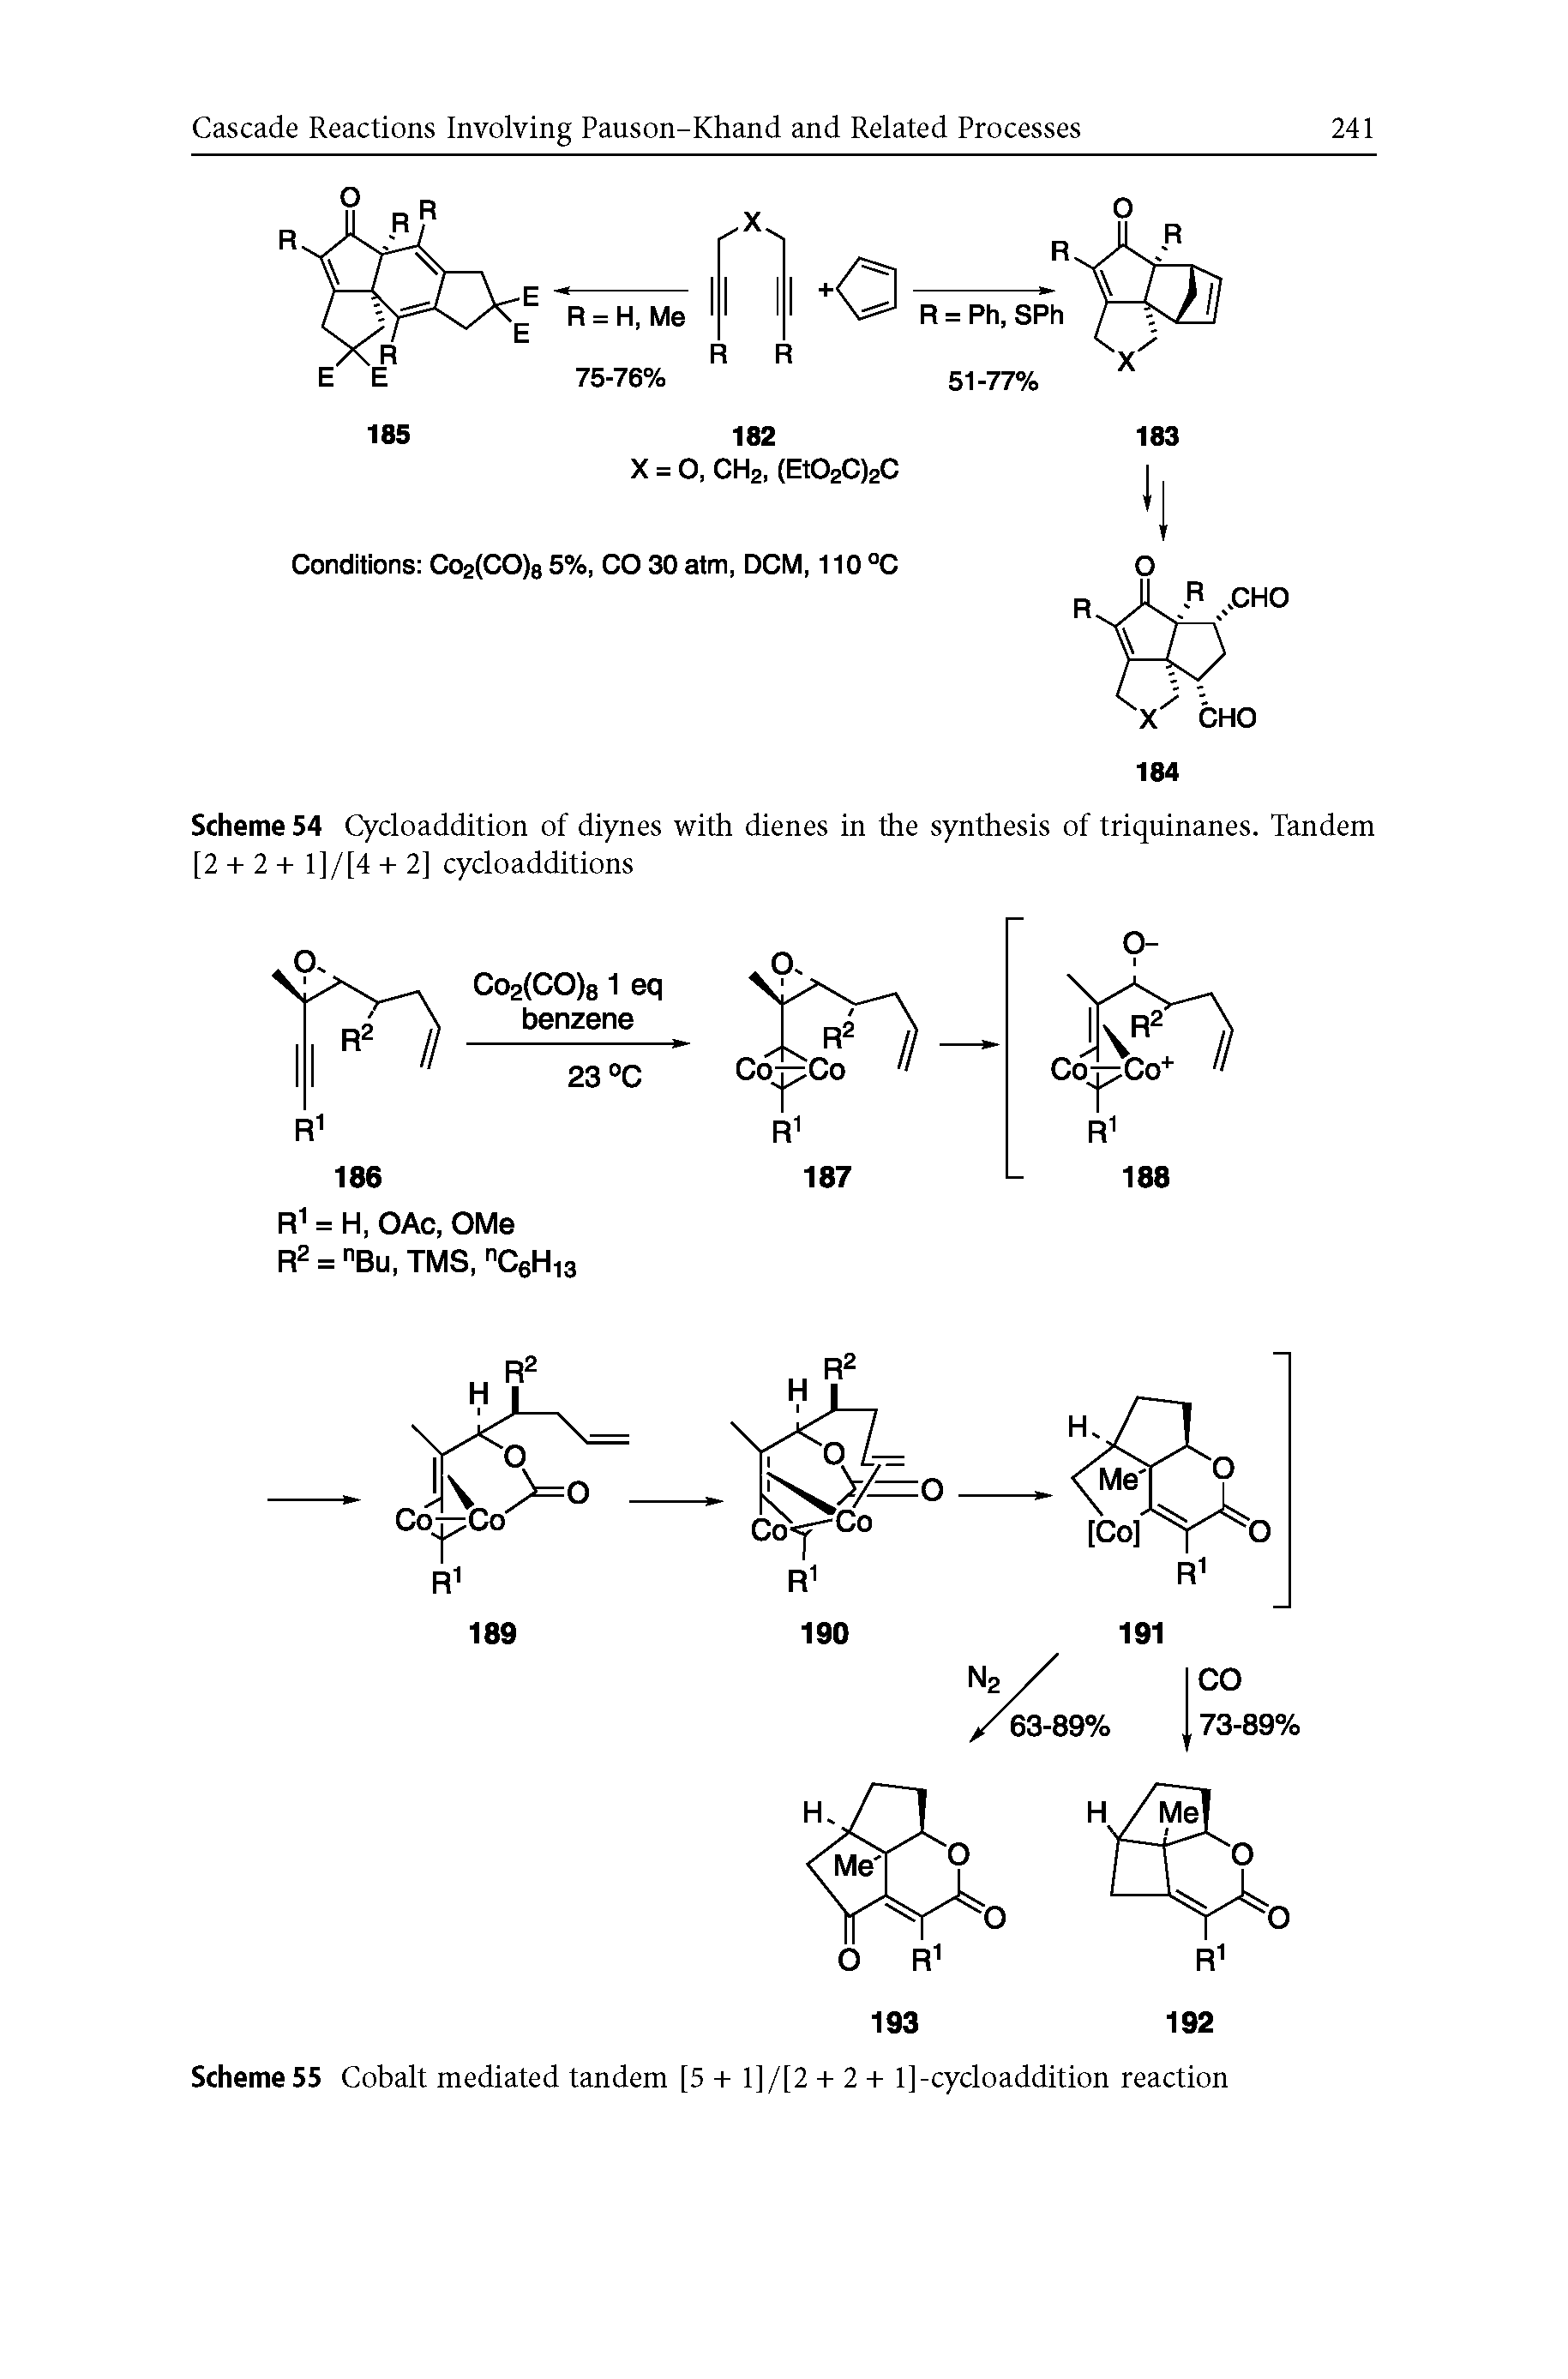 Scheme 54 Cycloaddition of diynes with dienes in the synthesis of triquinanes. Tandem [2 + 2 + l]/[4 + 2] cycloadditions...